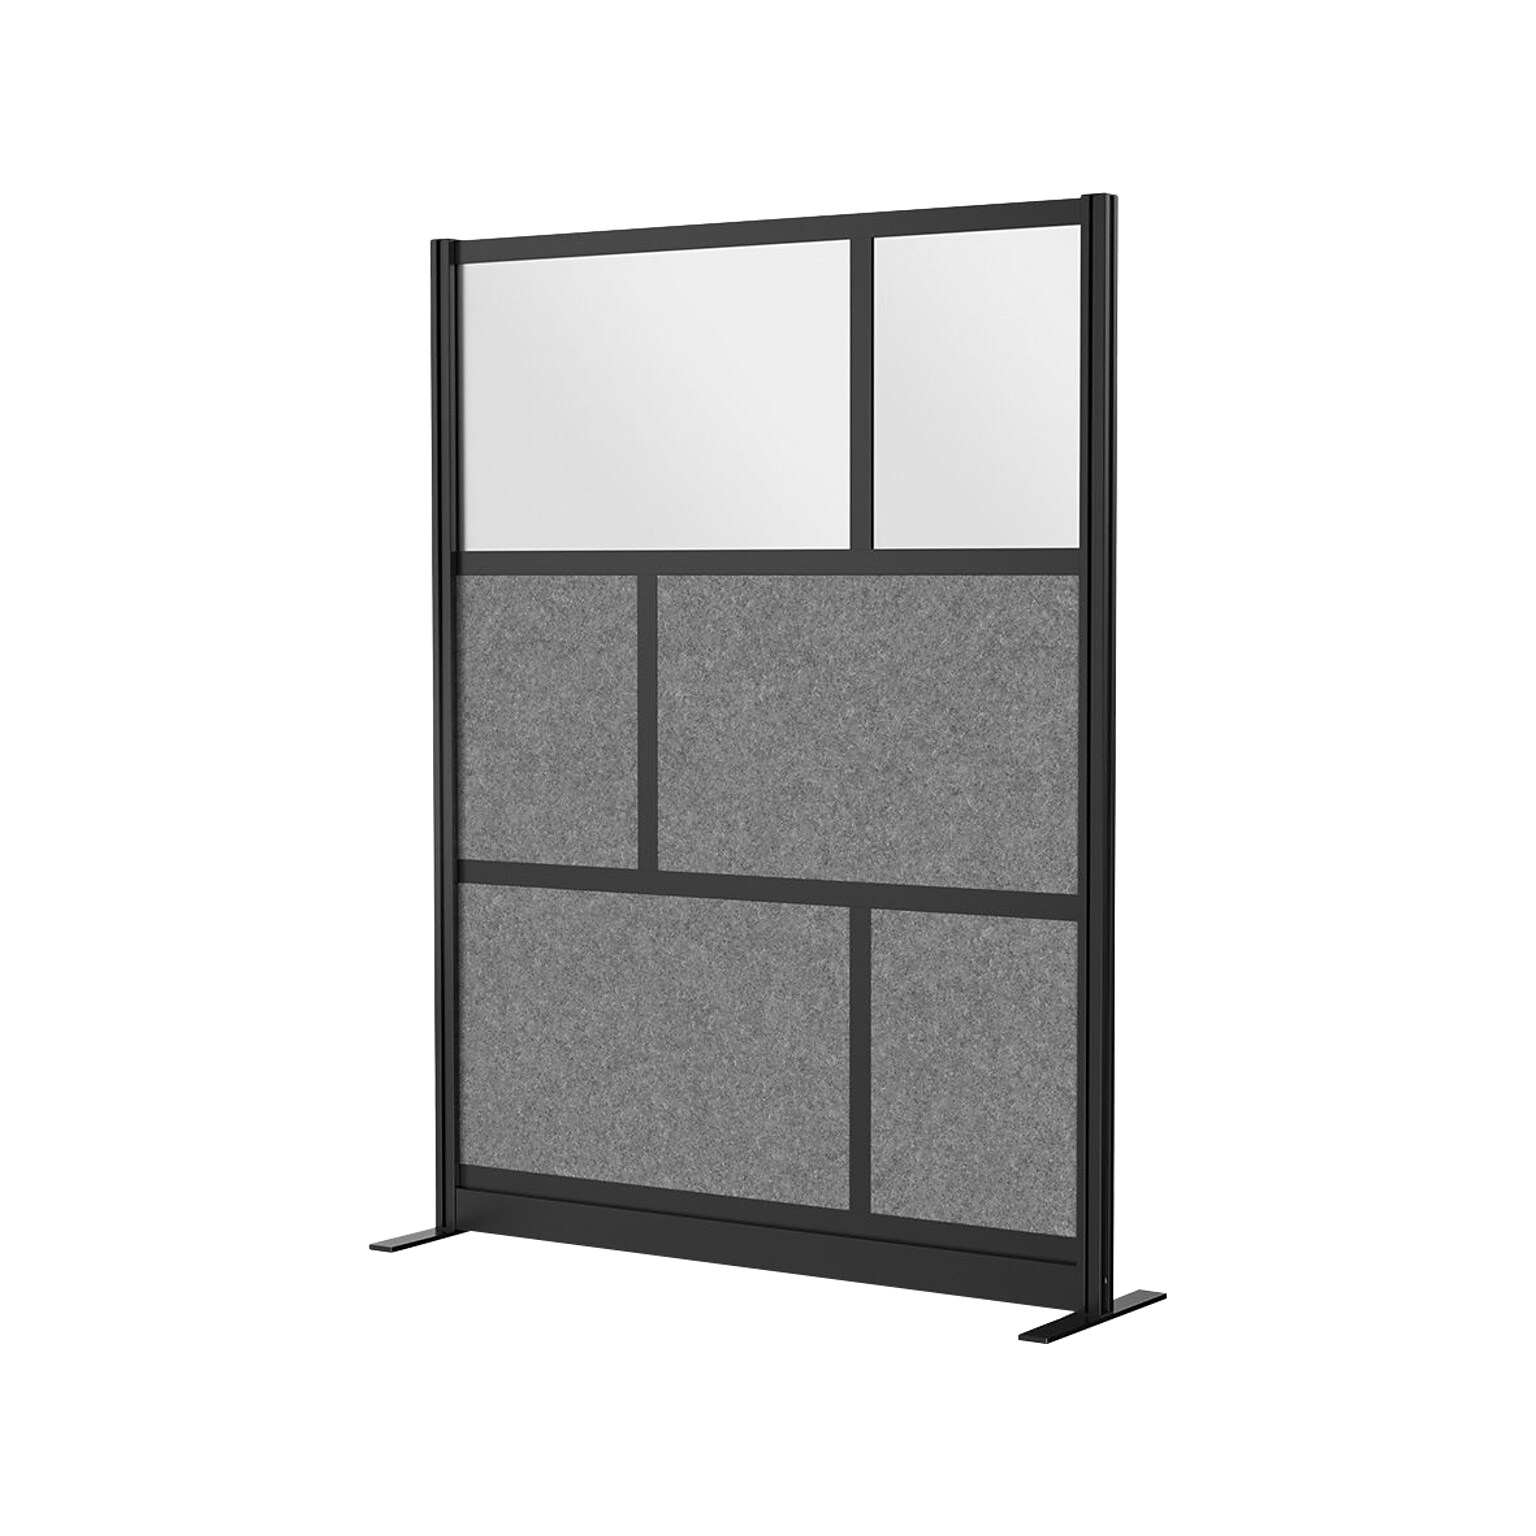 Luxor Expanse Series 6-Panel Freestanding Room Divider System Starter Wall, 70H x 53W, Black/Gray (MW-5370-FCGB)